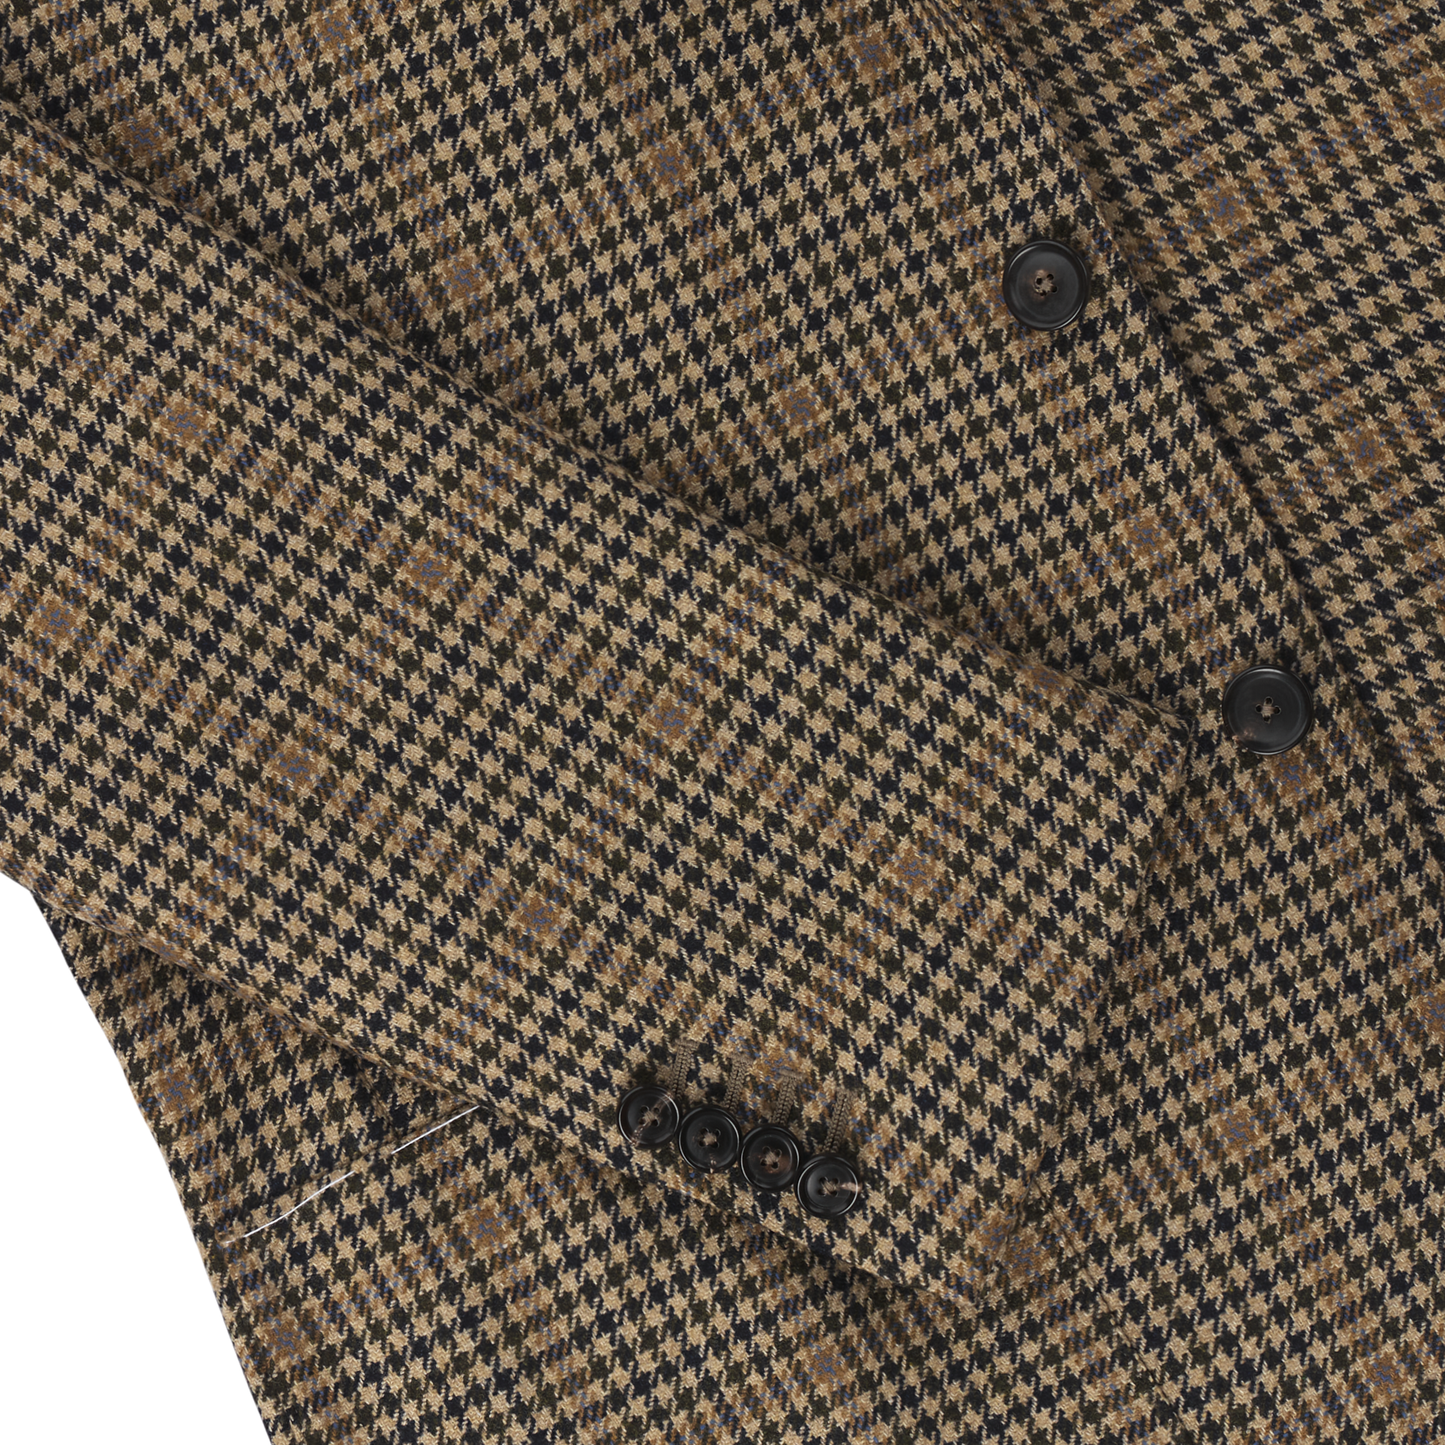 De Petrillo Single-Breasted Houndstooth Wool Jacket in Brown. Exclusively Made for Sartale - SARTALE